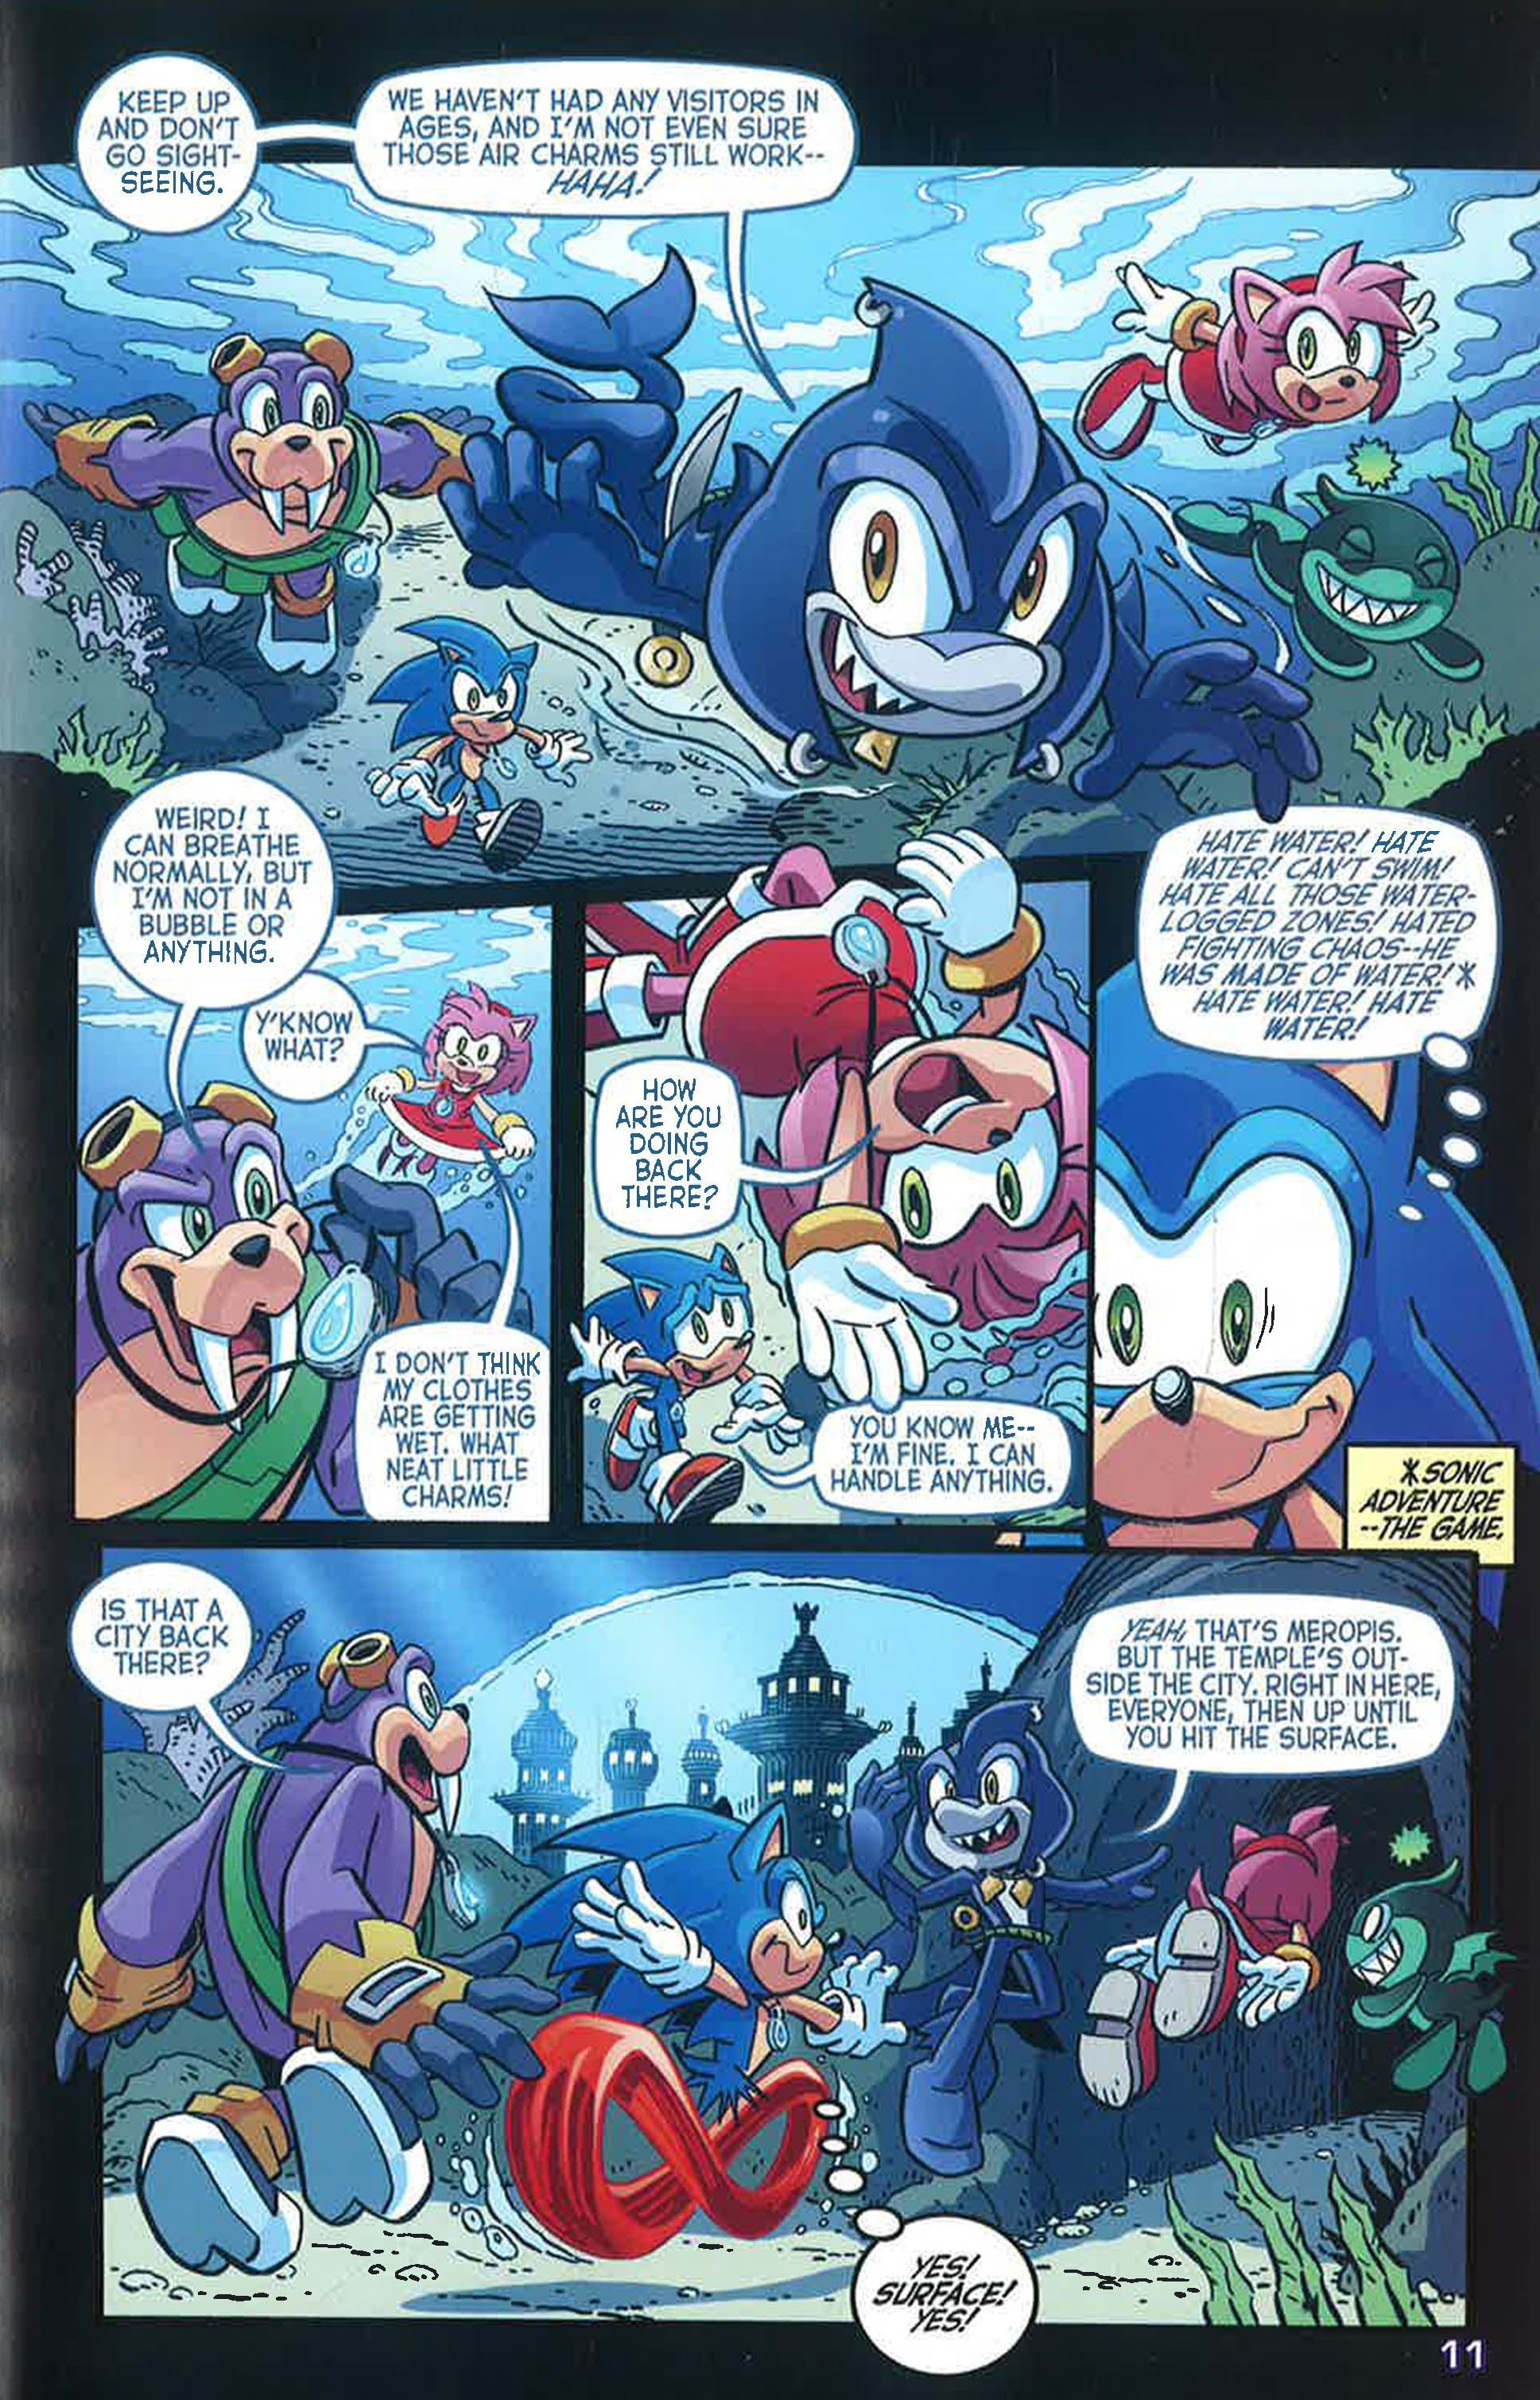 Sonic the Hedgehog Ser.: Sonic the Hedgehog 3: Waves of Change by